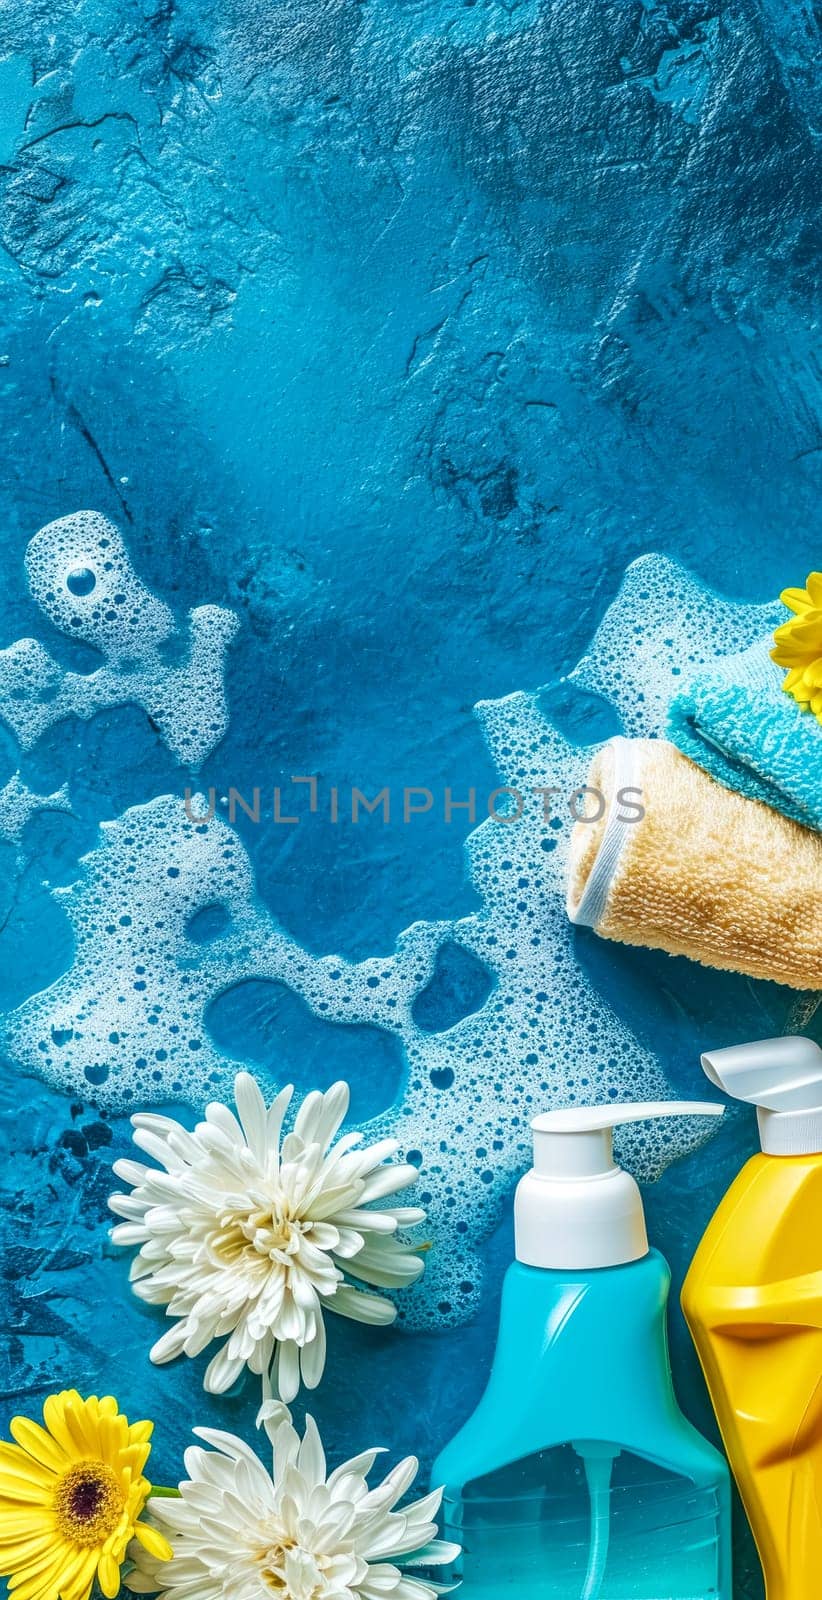 cleaning supplies and accessories with flowers on a textured blue background with copy space by Edophoto